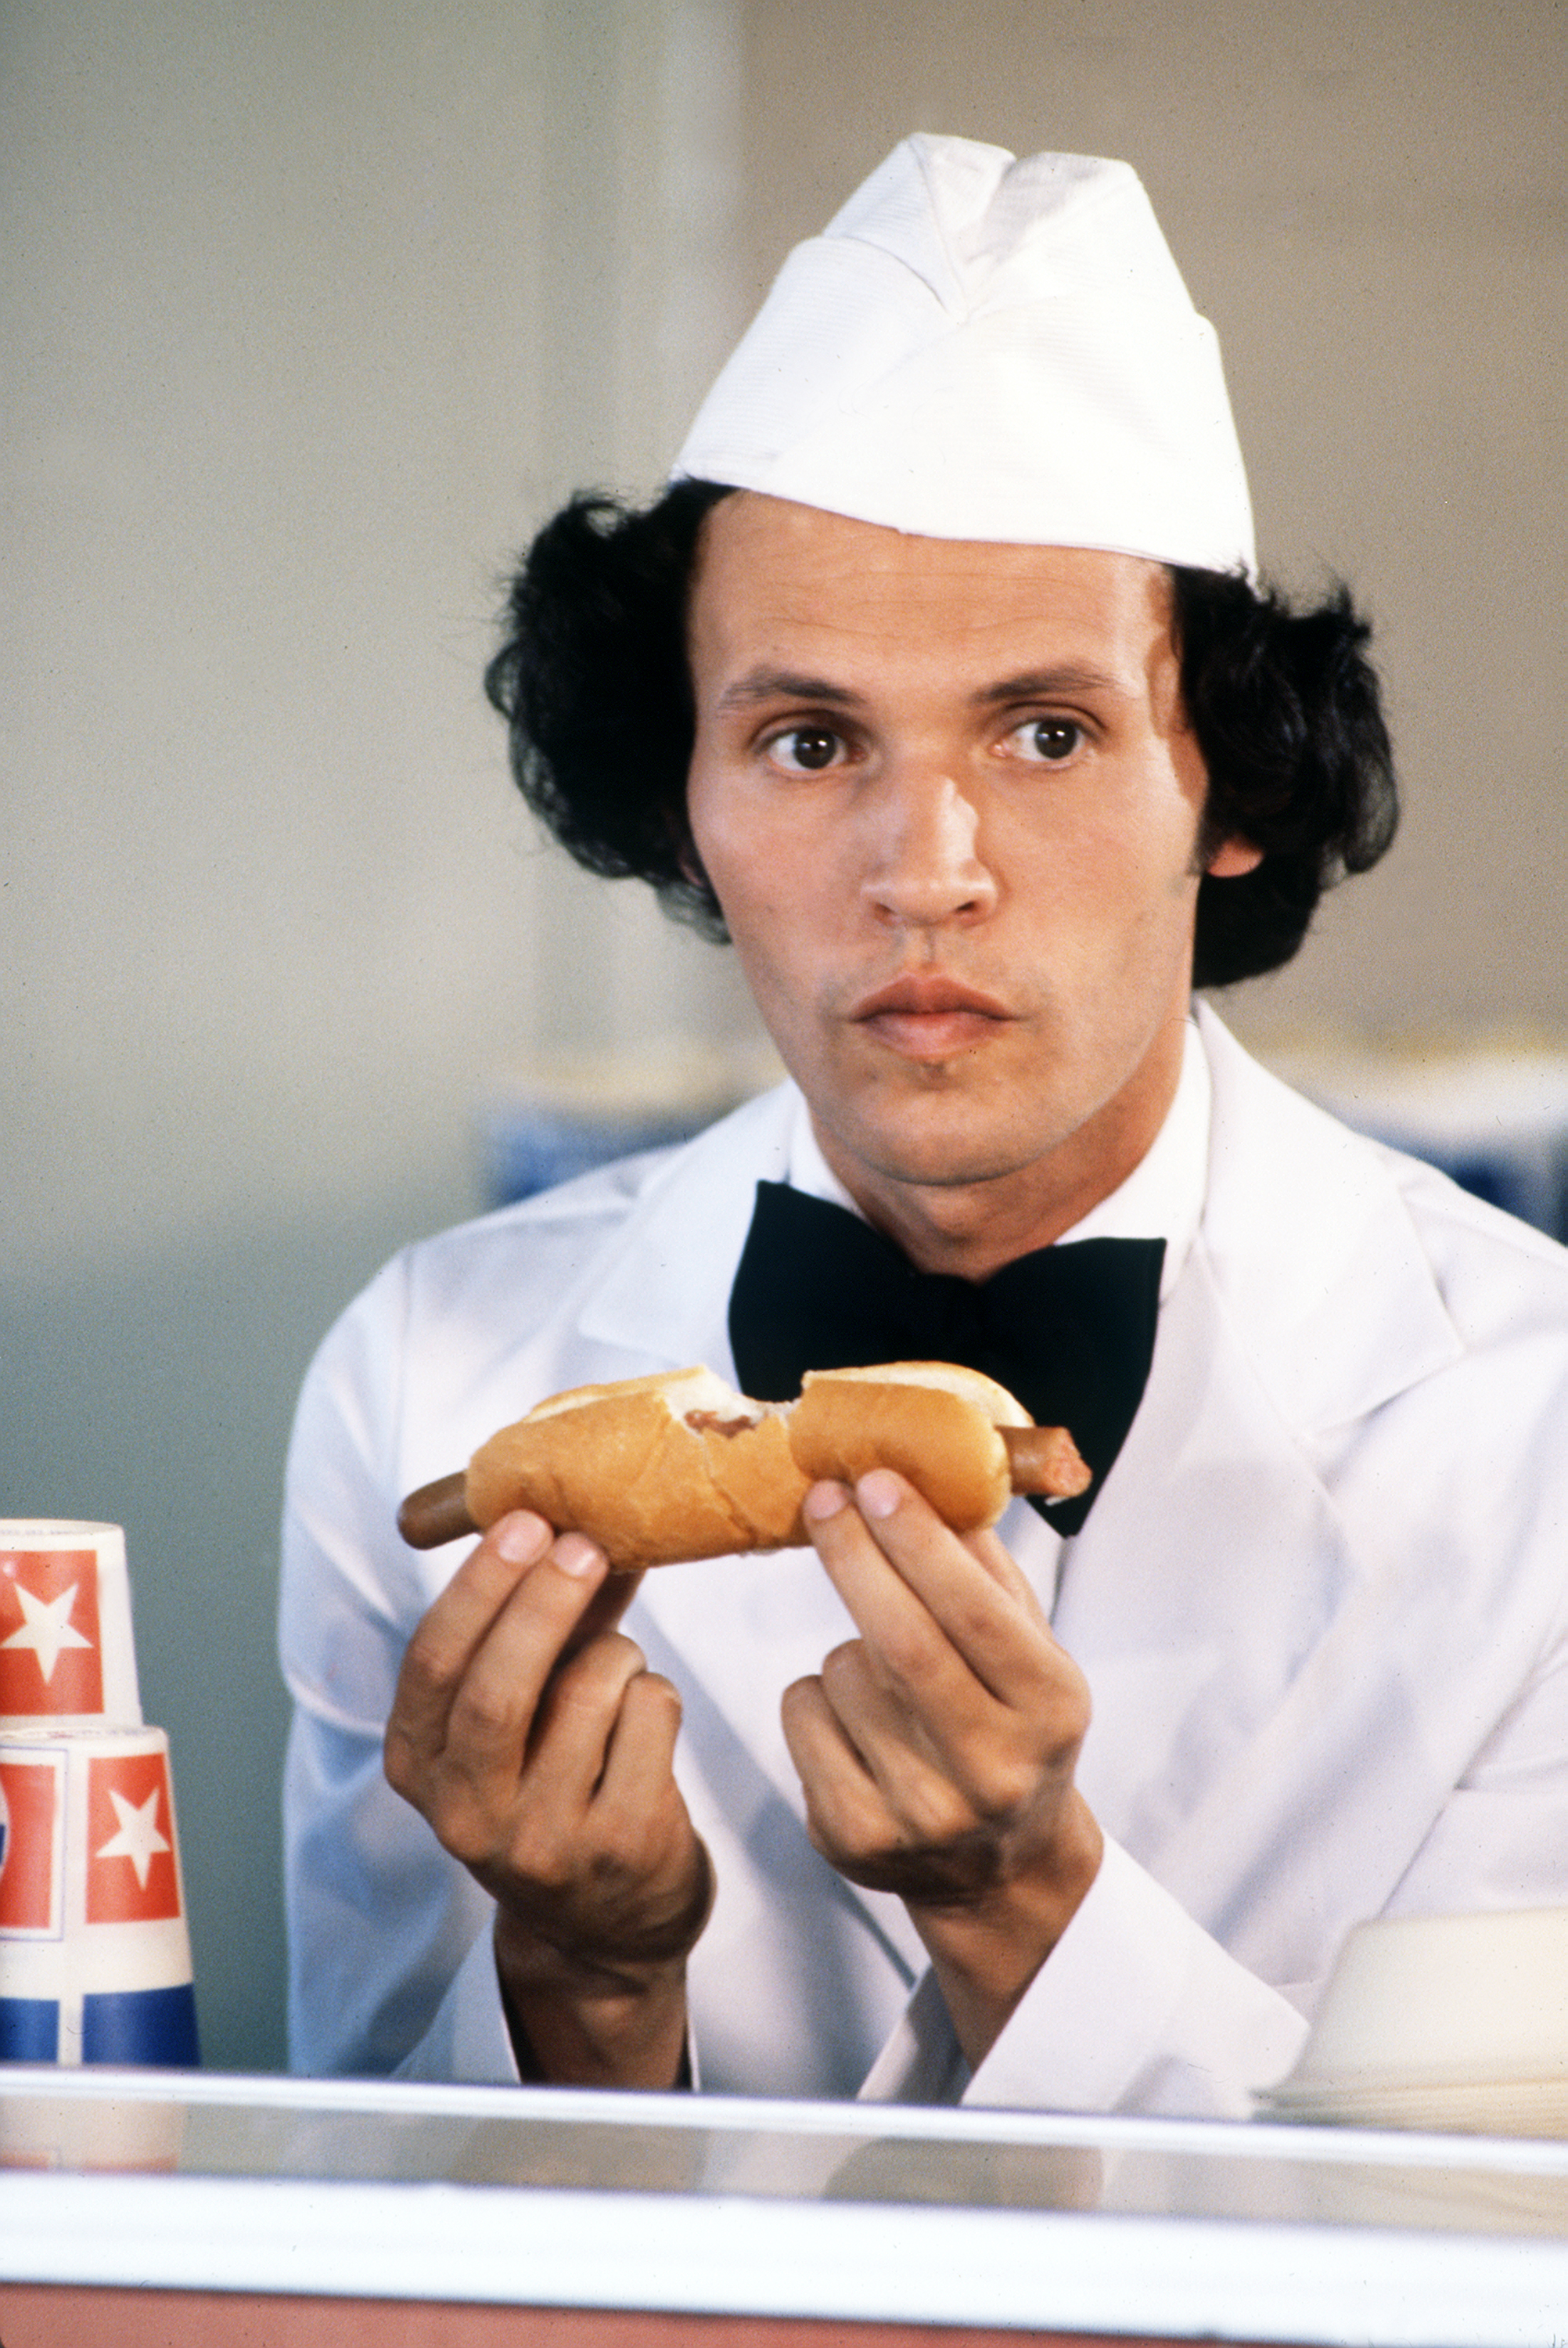 Billy Crystal on the set of "Soap" on September 21, 1978. | Source: Getty Images